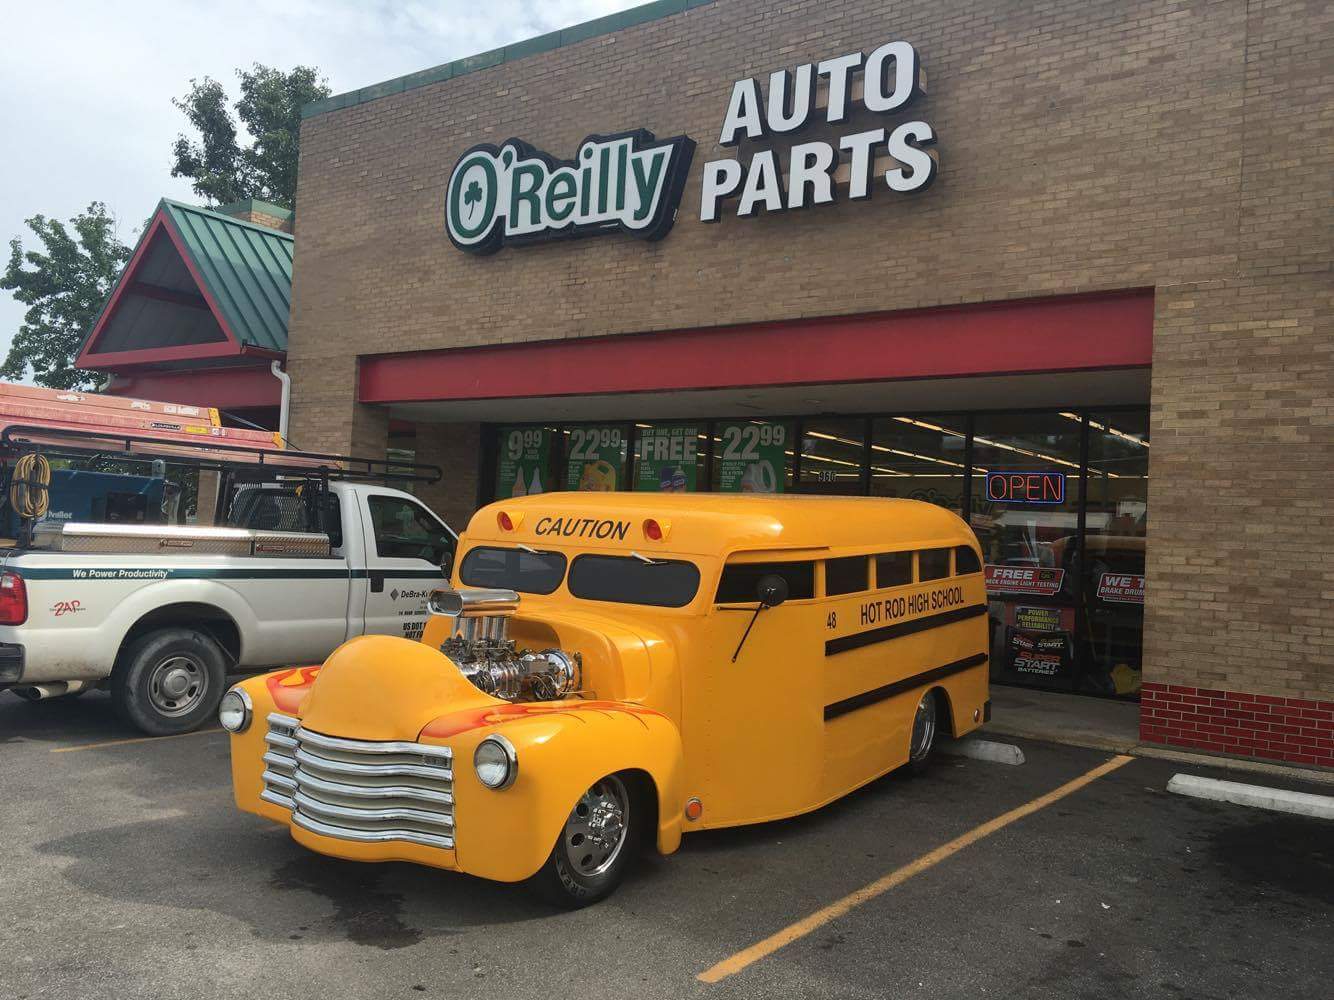 O’Reilly Auto Parts - Littleton (CO 80123), US, aftermarket ford parts